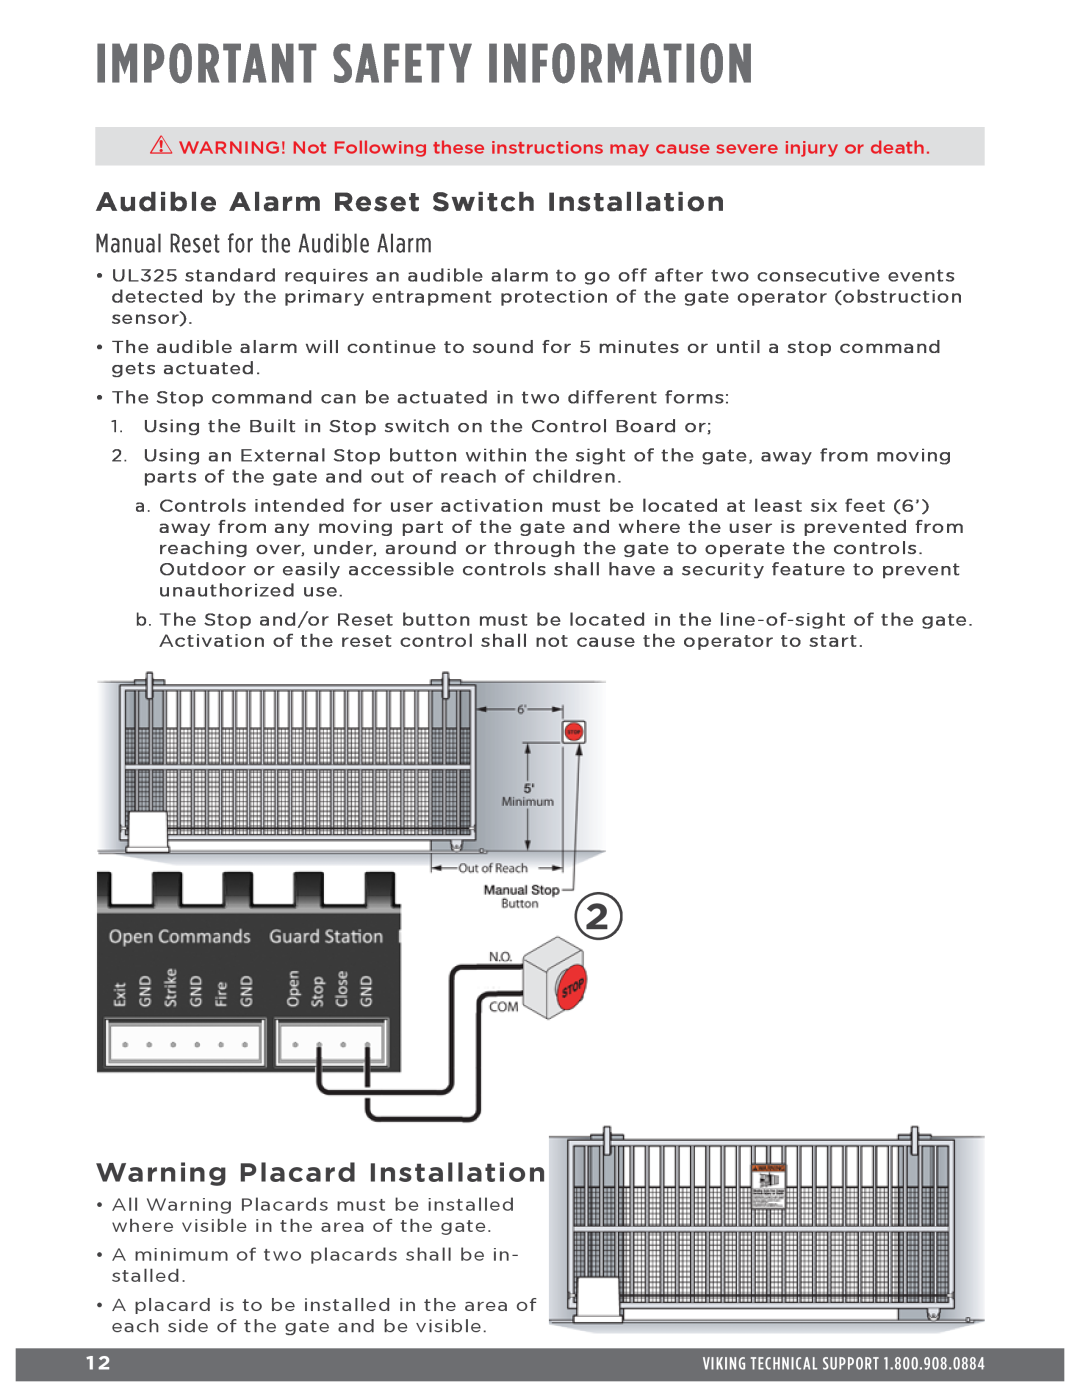 Viking Access Systems Q7 manual Audible Alarm Reset Switch Installation, Manual Reset for the Audible Alarm 